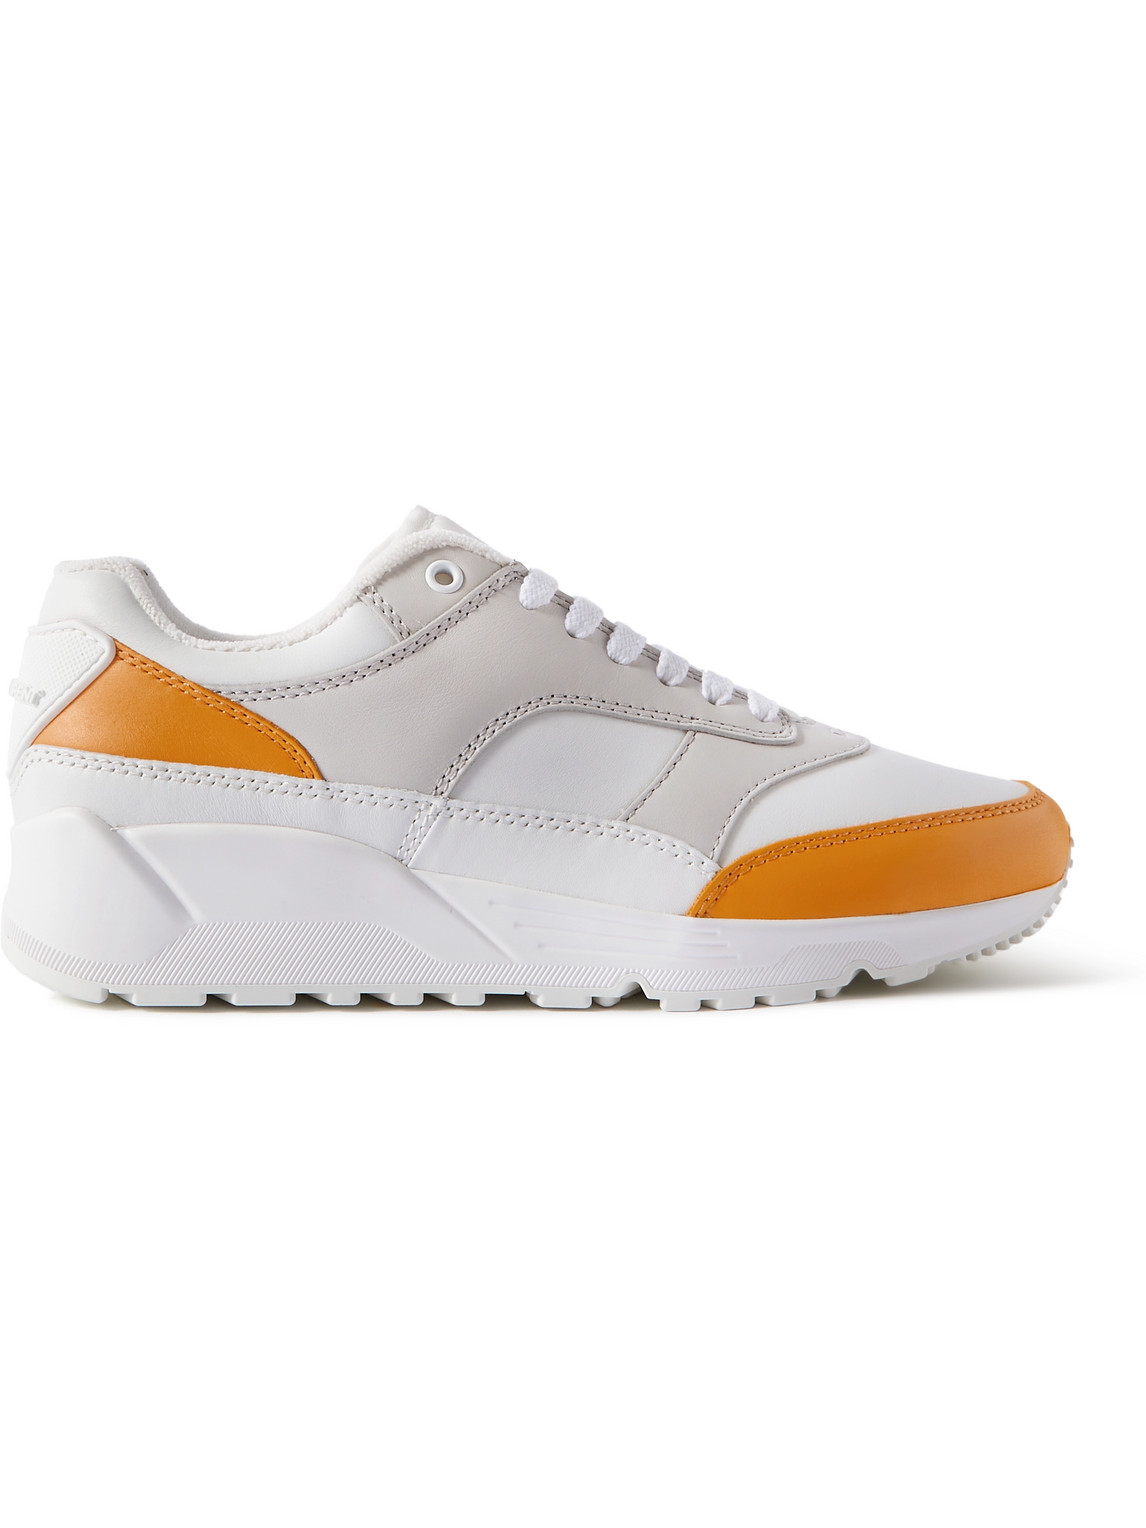 Saint Laurent Colour-block Leather Low-top Sneakers In Yellow